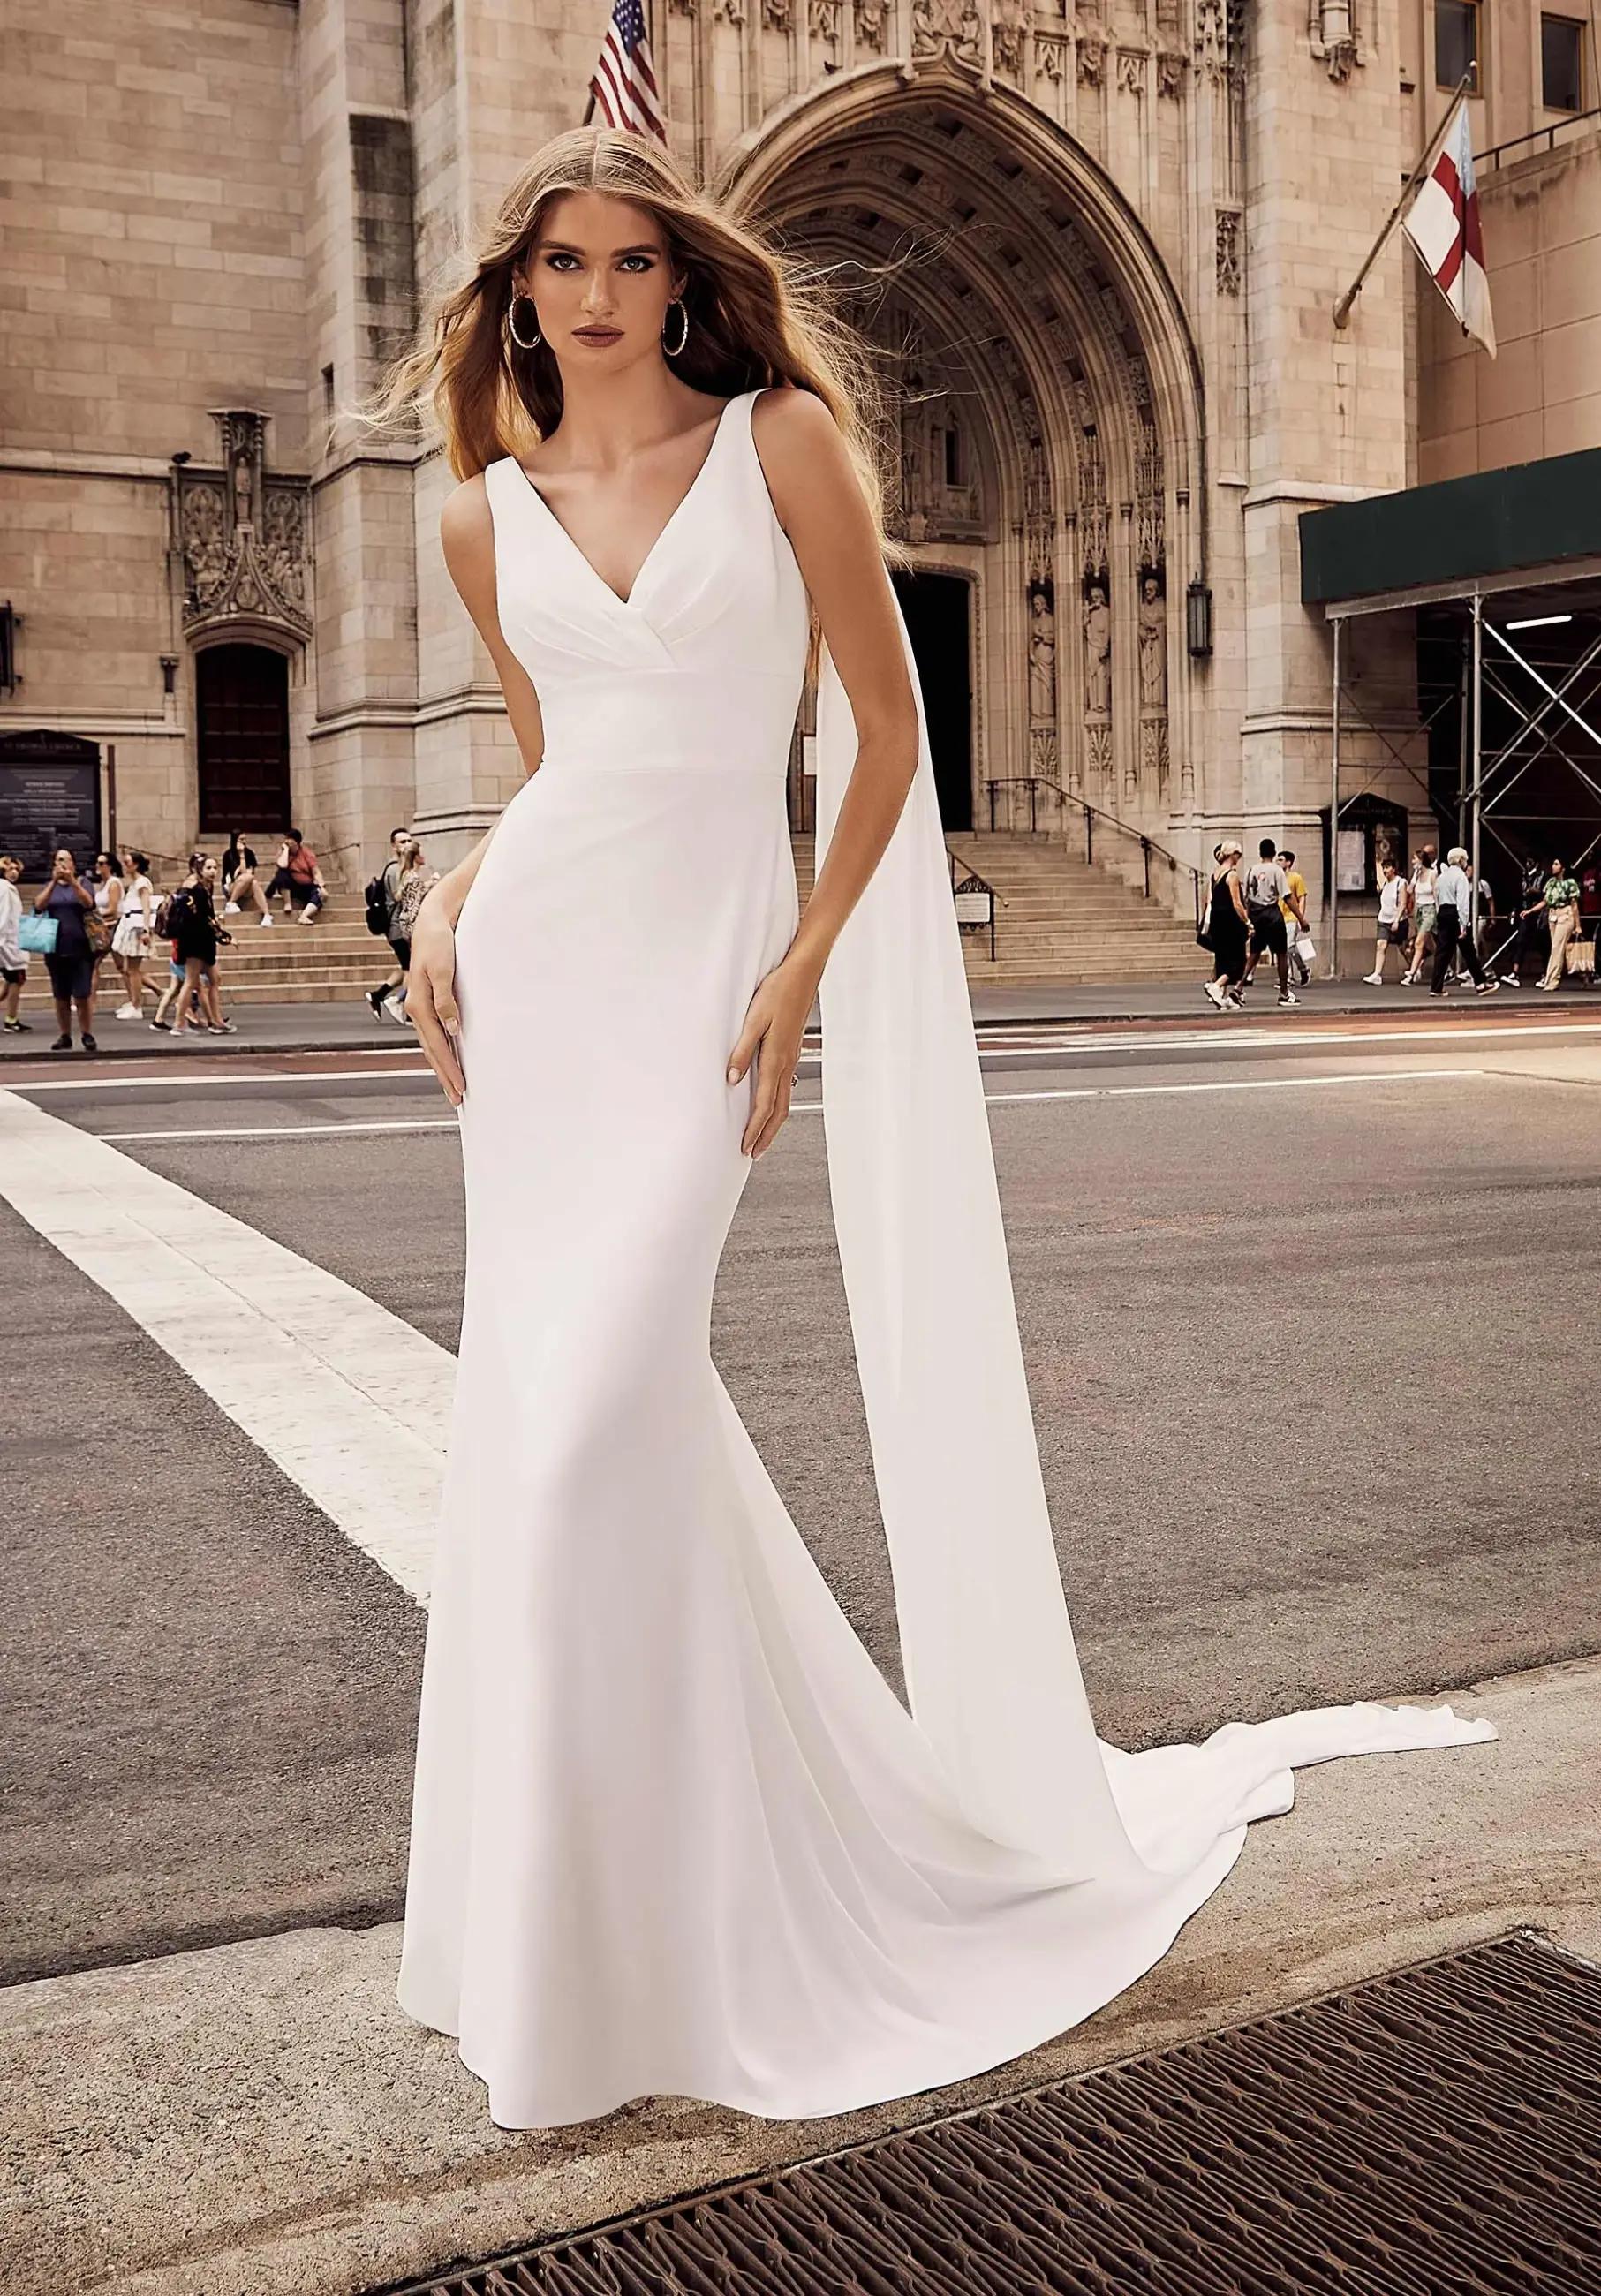 Tying the Knot in Style: Winter/Spring Bridal Trends Unveiled Image